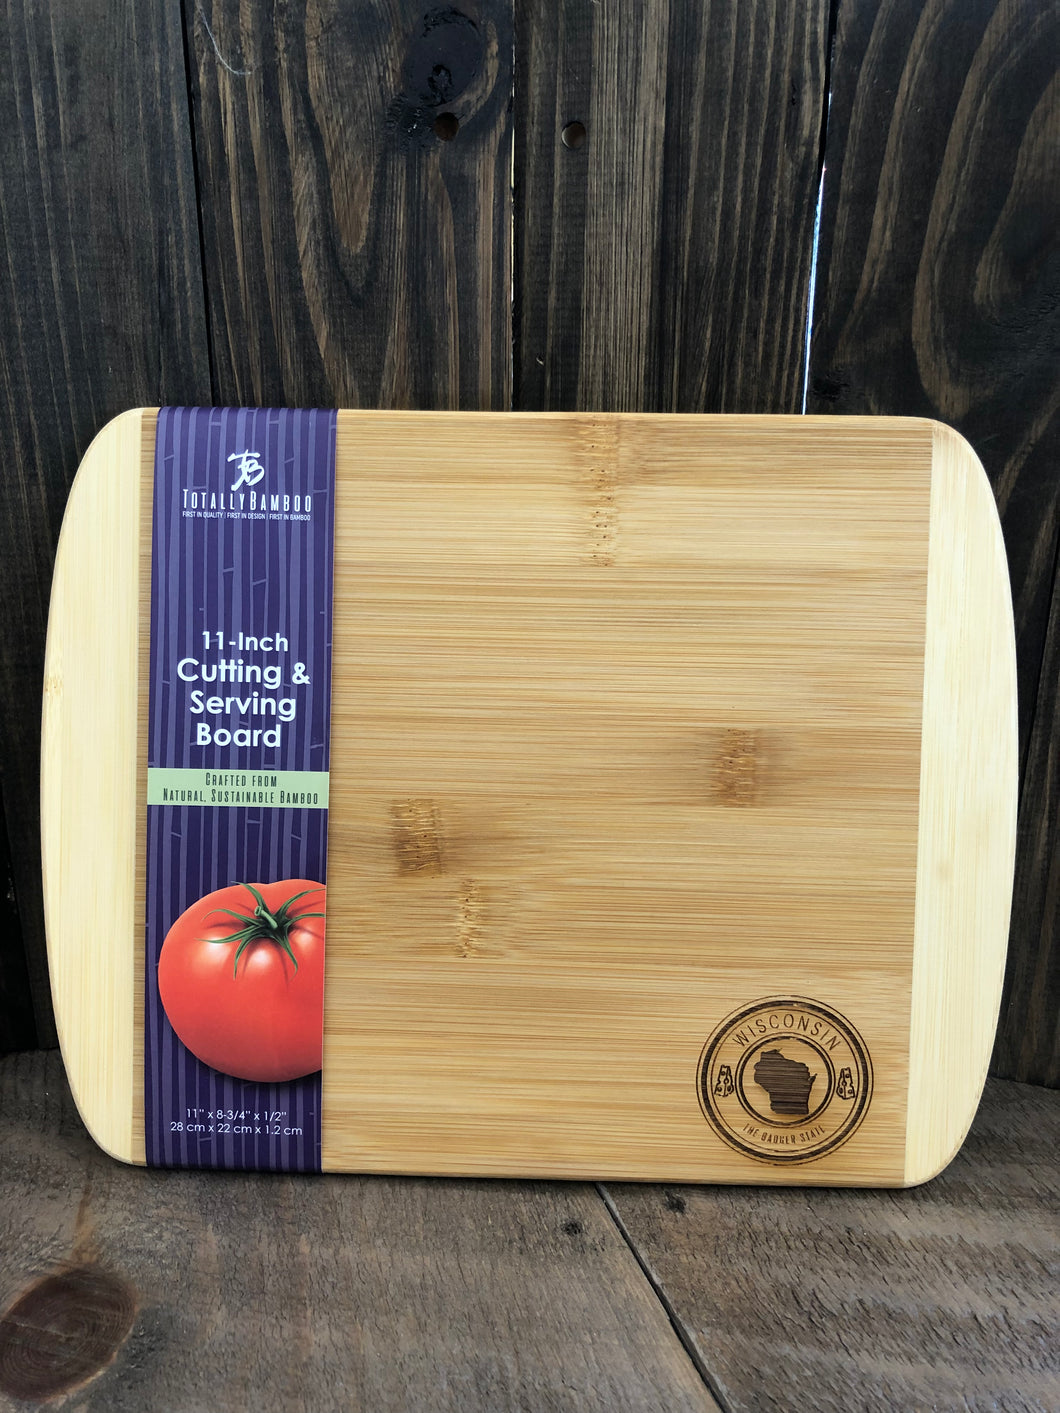 Totally Bamboo Wisconsin Stamp Cutting and Serving Board, 11